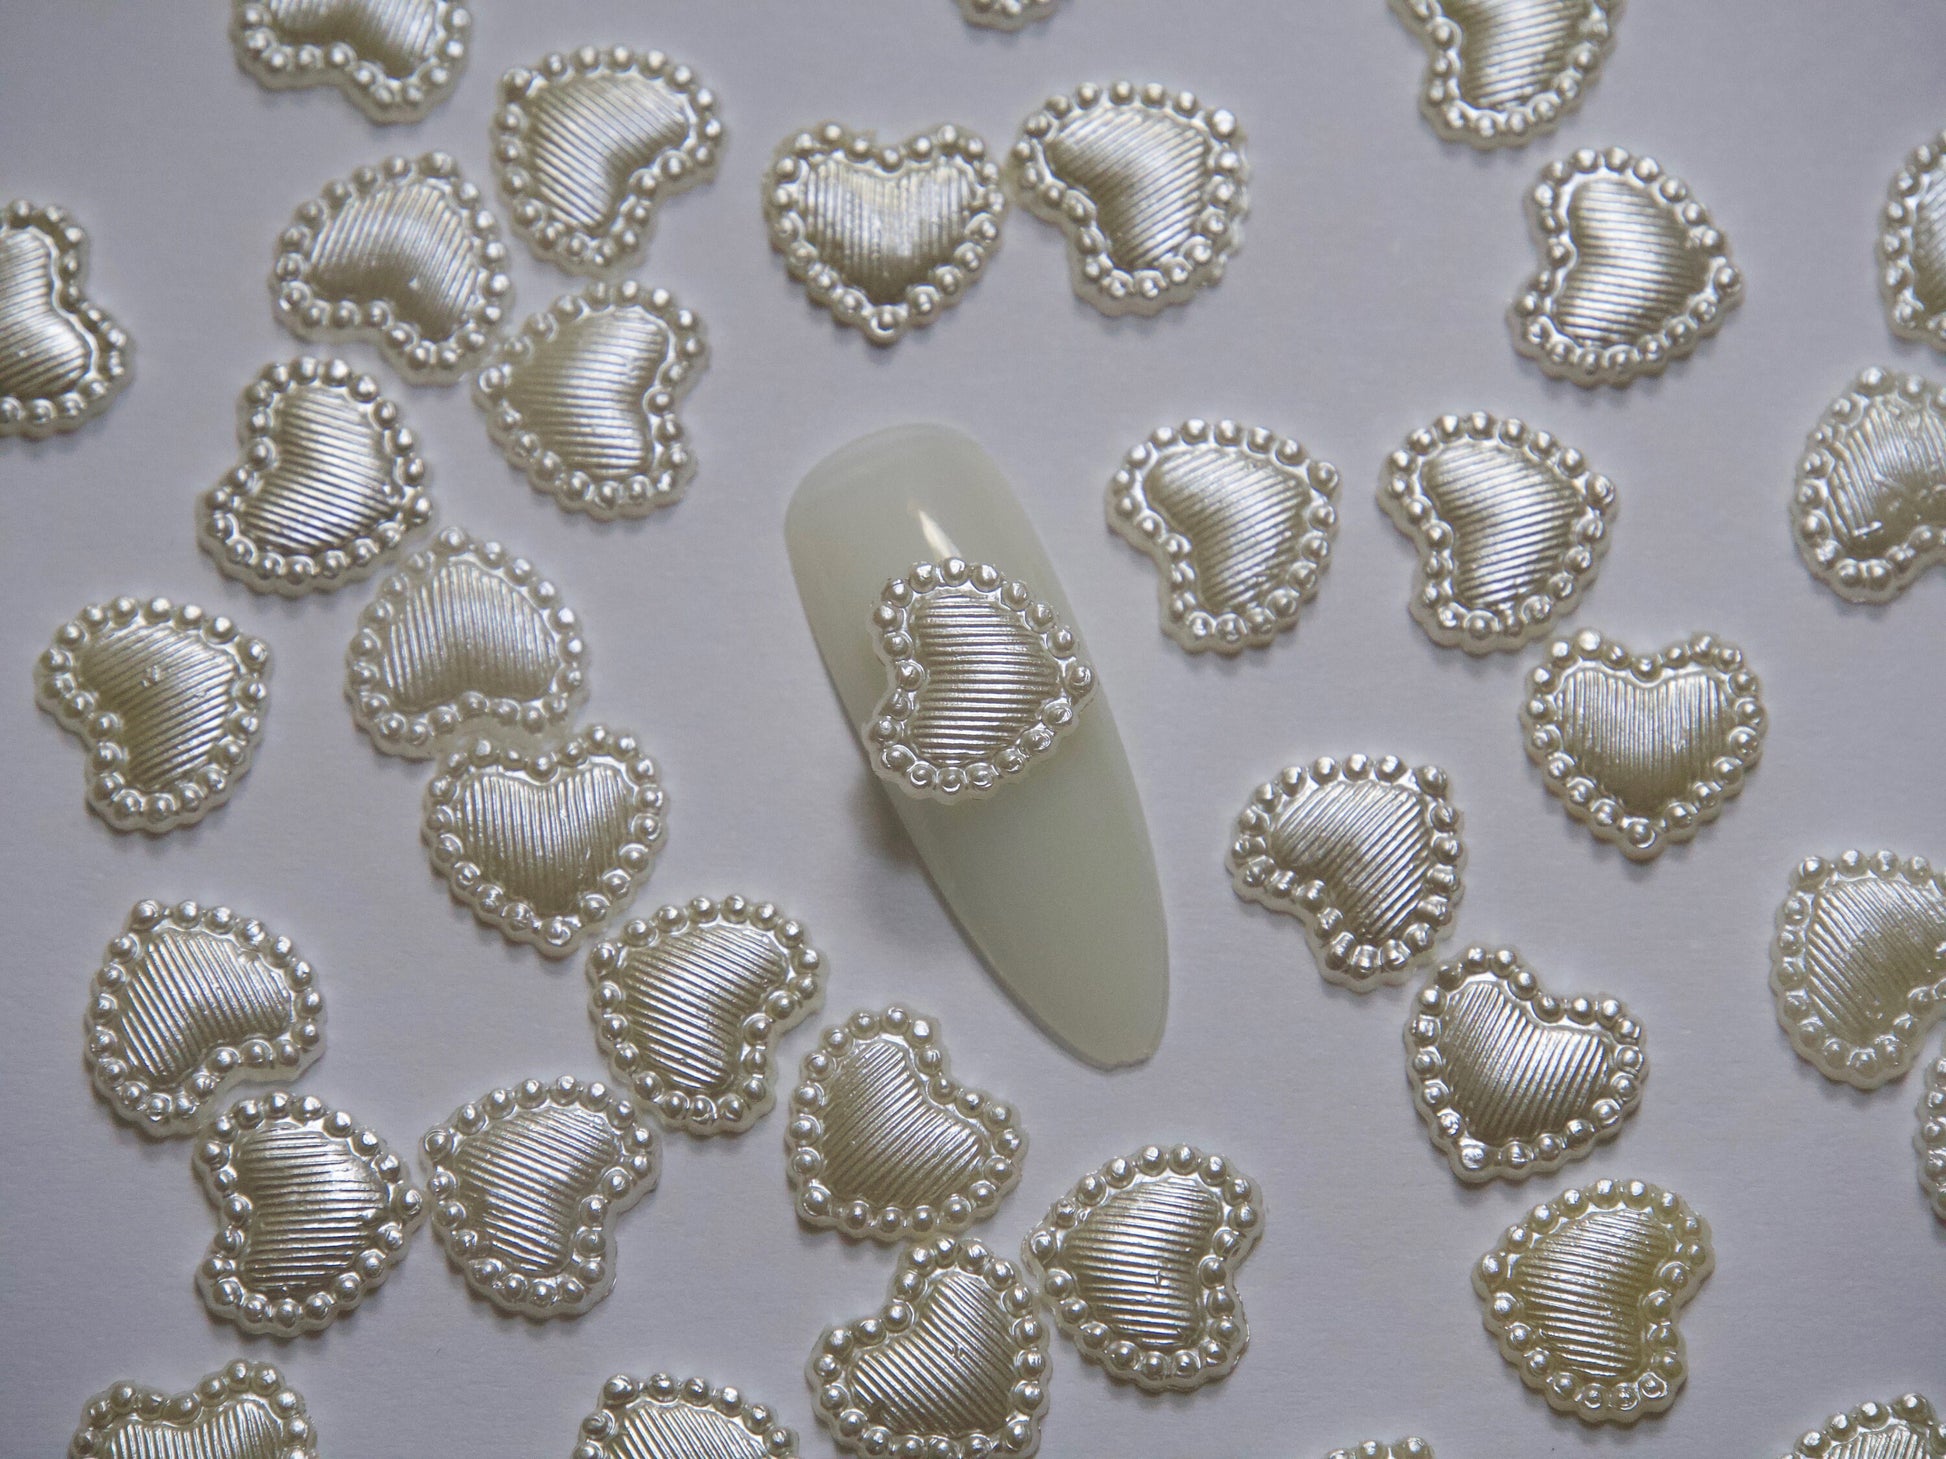 50pcs White Pearlescent Heart Decals